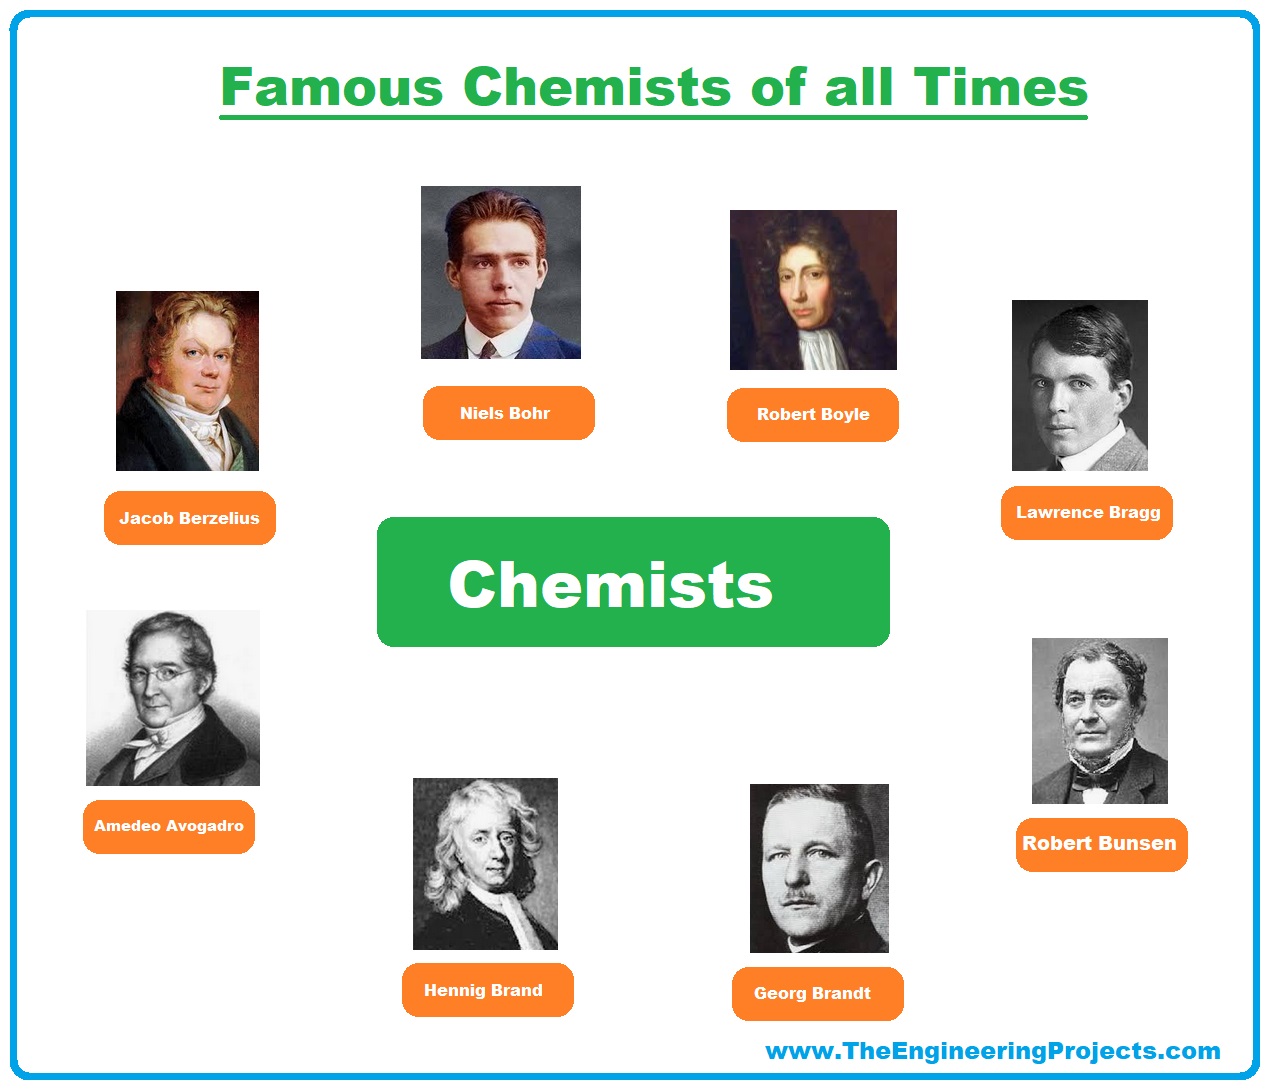 Chemistry, What is Chemistry, Chemistry Definition, Chemistry Branches, Chemistry Books,Chemistry Scientists, chemists, chemistry meaning, famous chemists